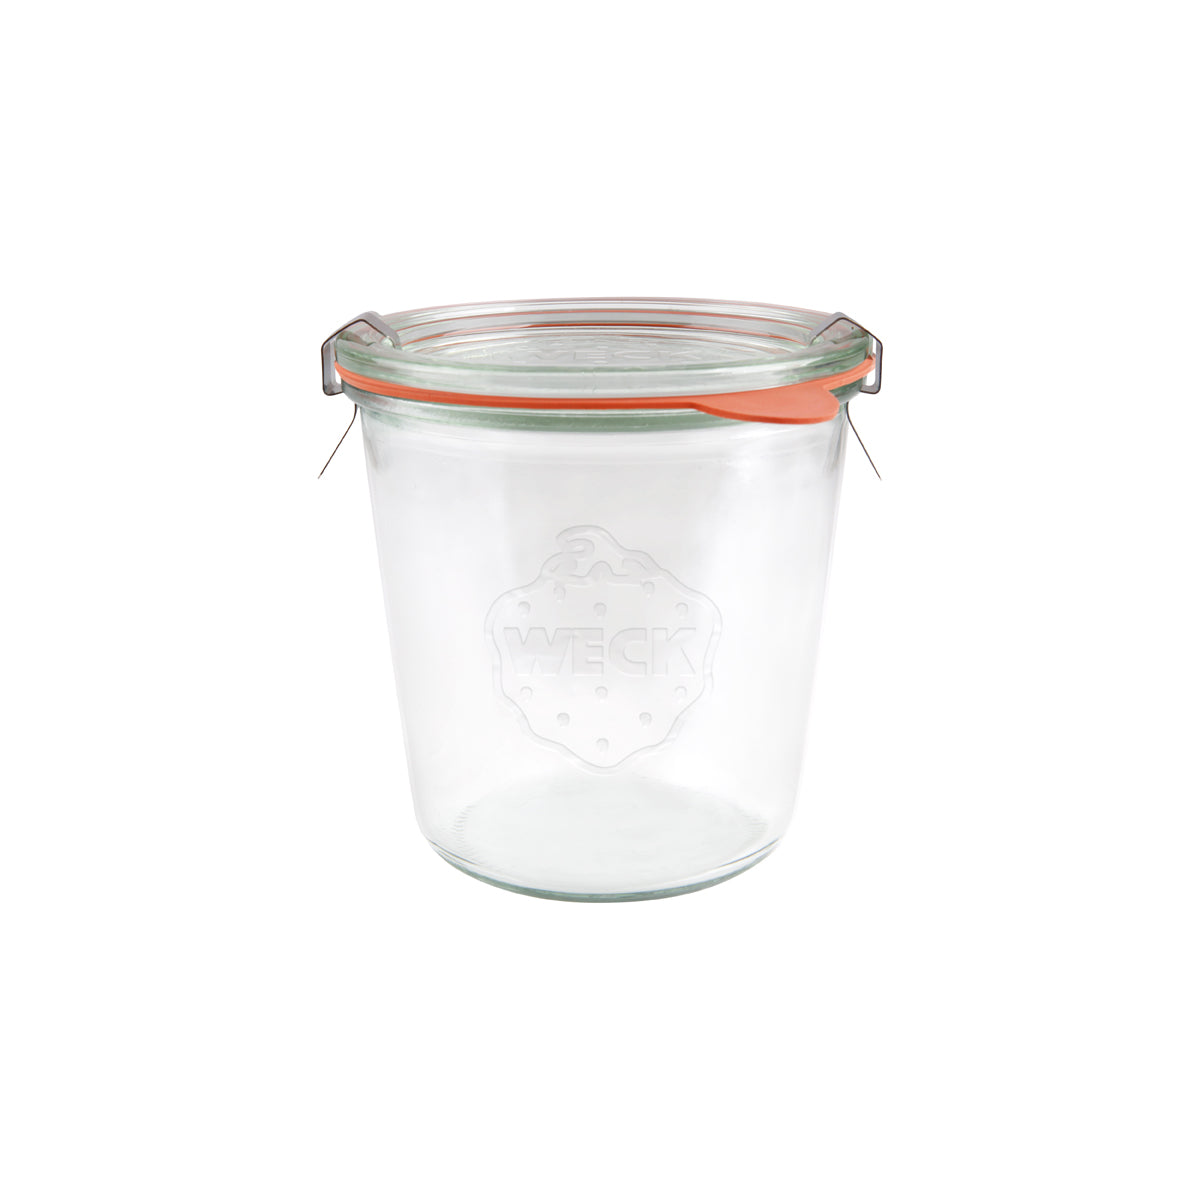 Complete Glass Jar with Lid-Seal and clamps (#742) - 580mL, 100x107mm: Pack of 6